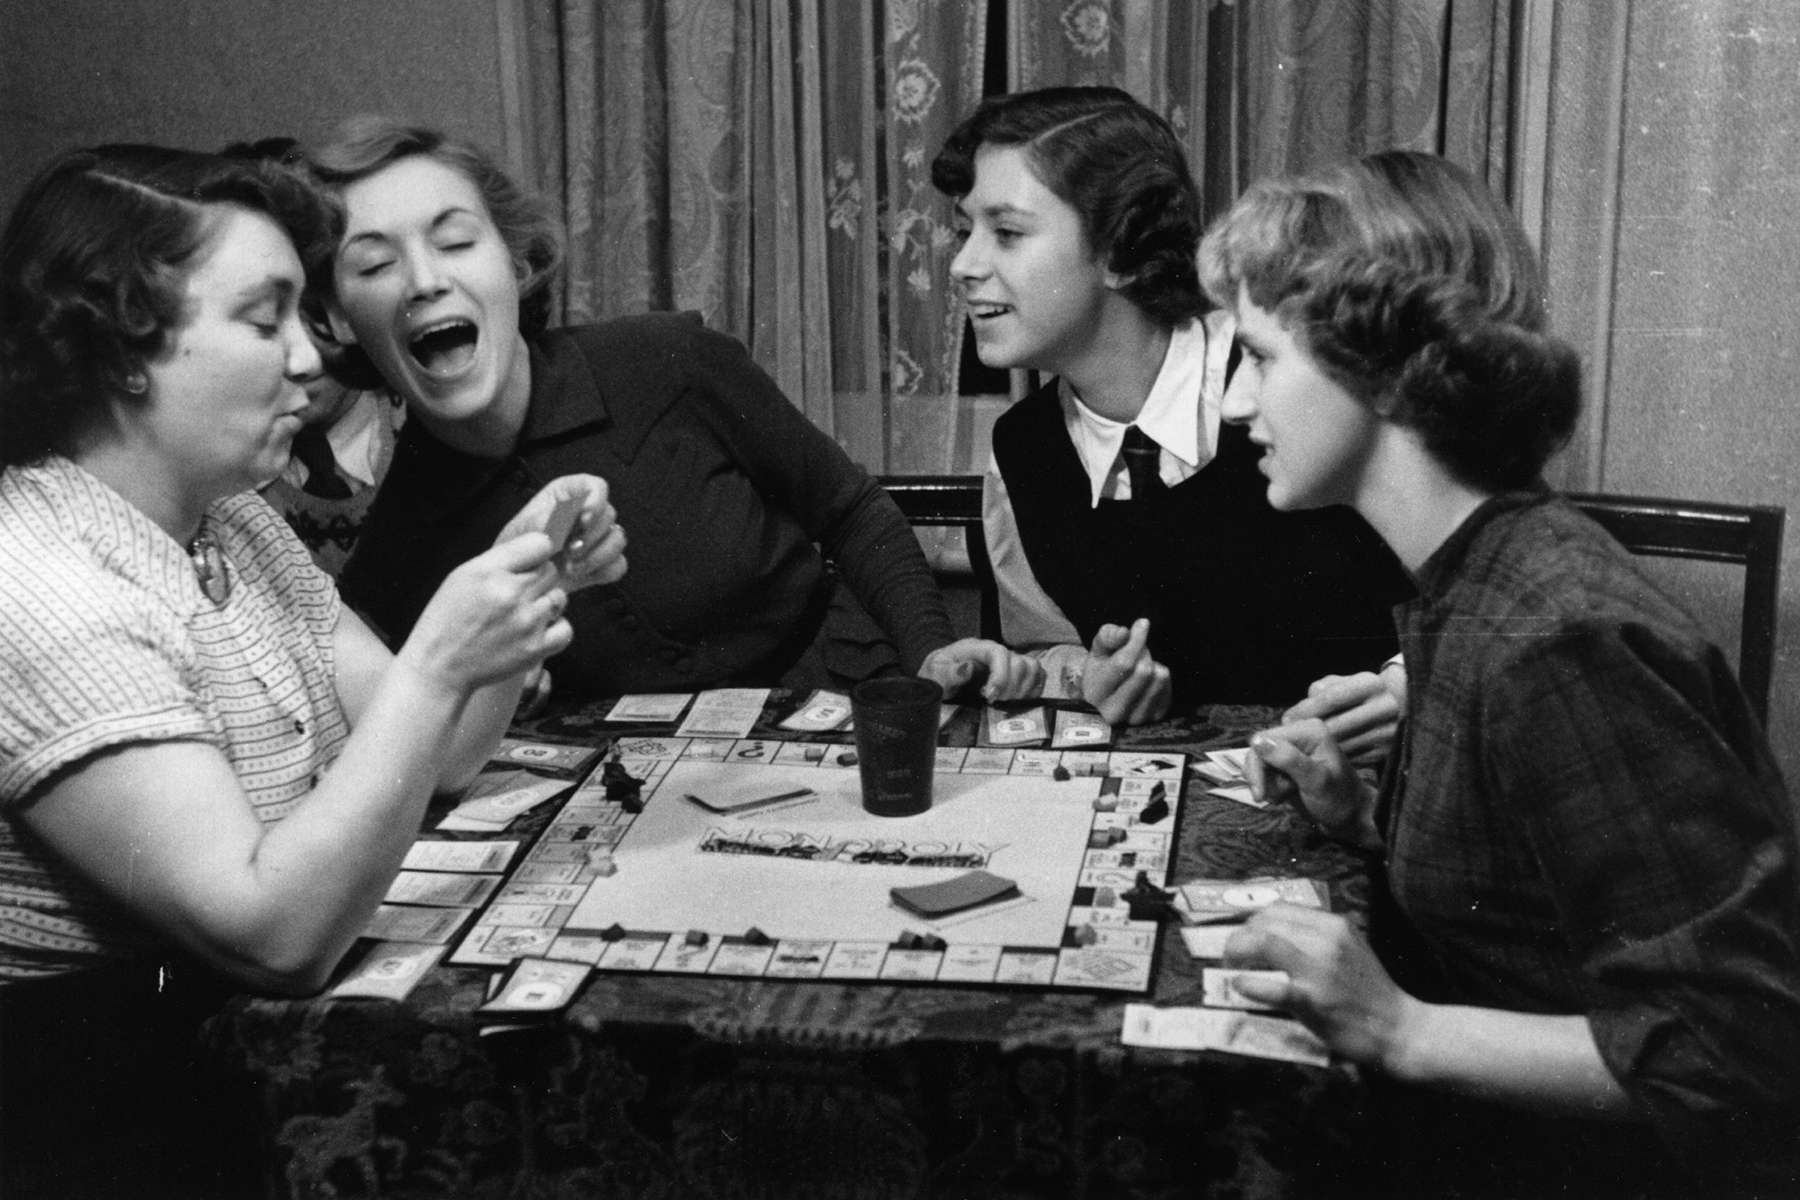 During the Great Depression families and neighbors gathered around Monopoly, which by 1936 was owned by millions of American households.